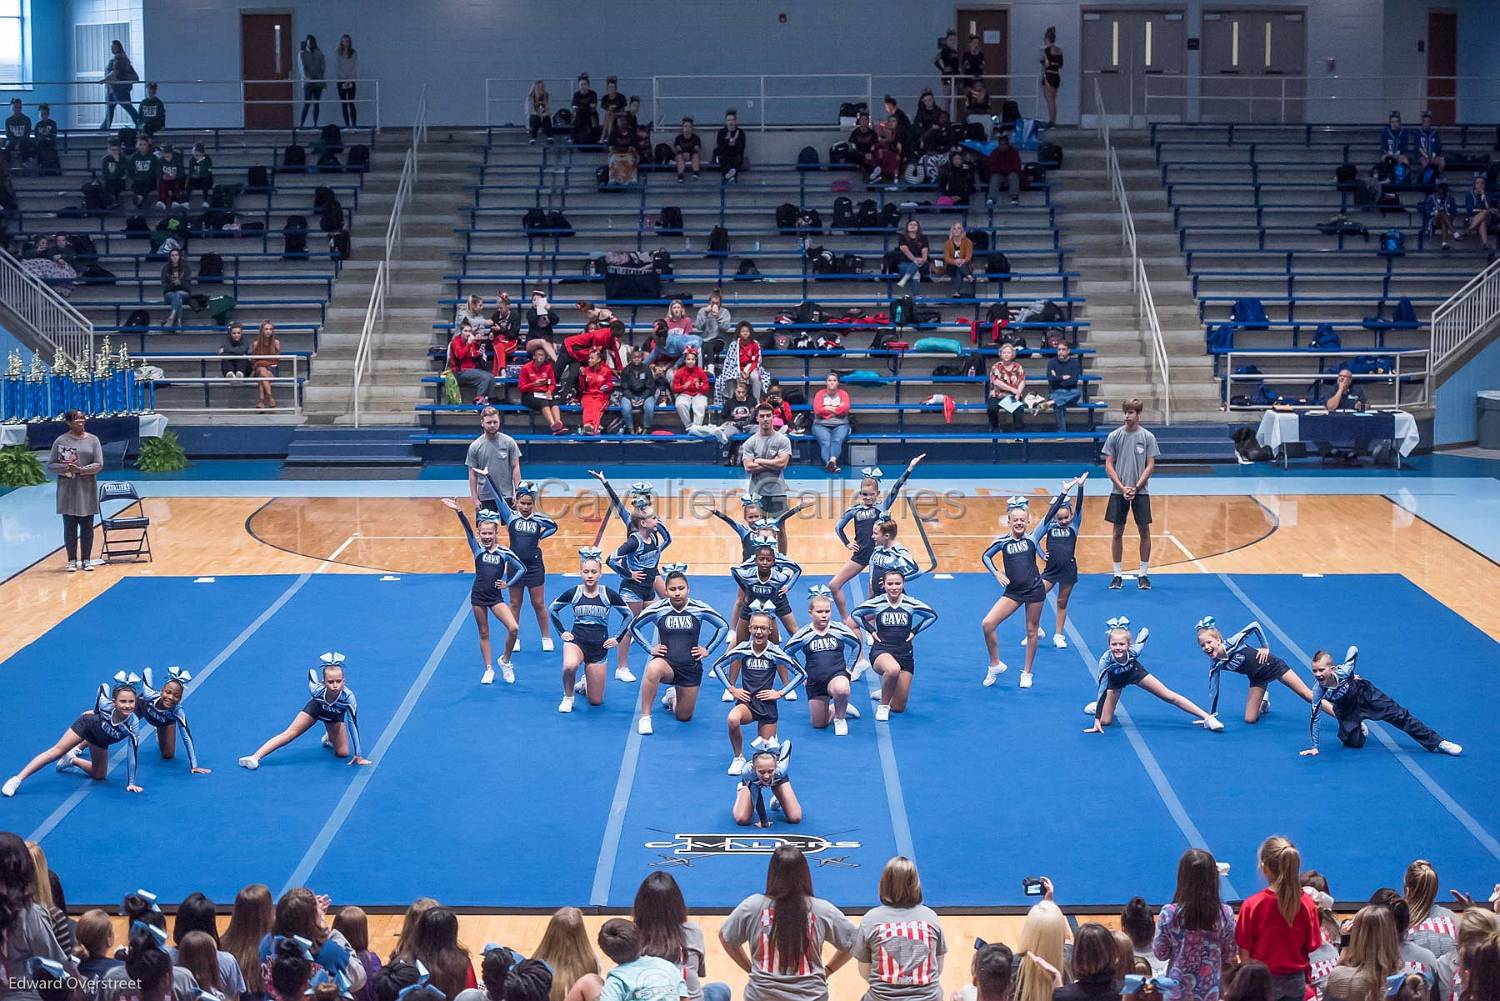 D6YouthCheerClassic 58.jpg